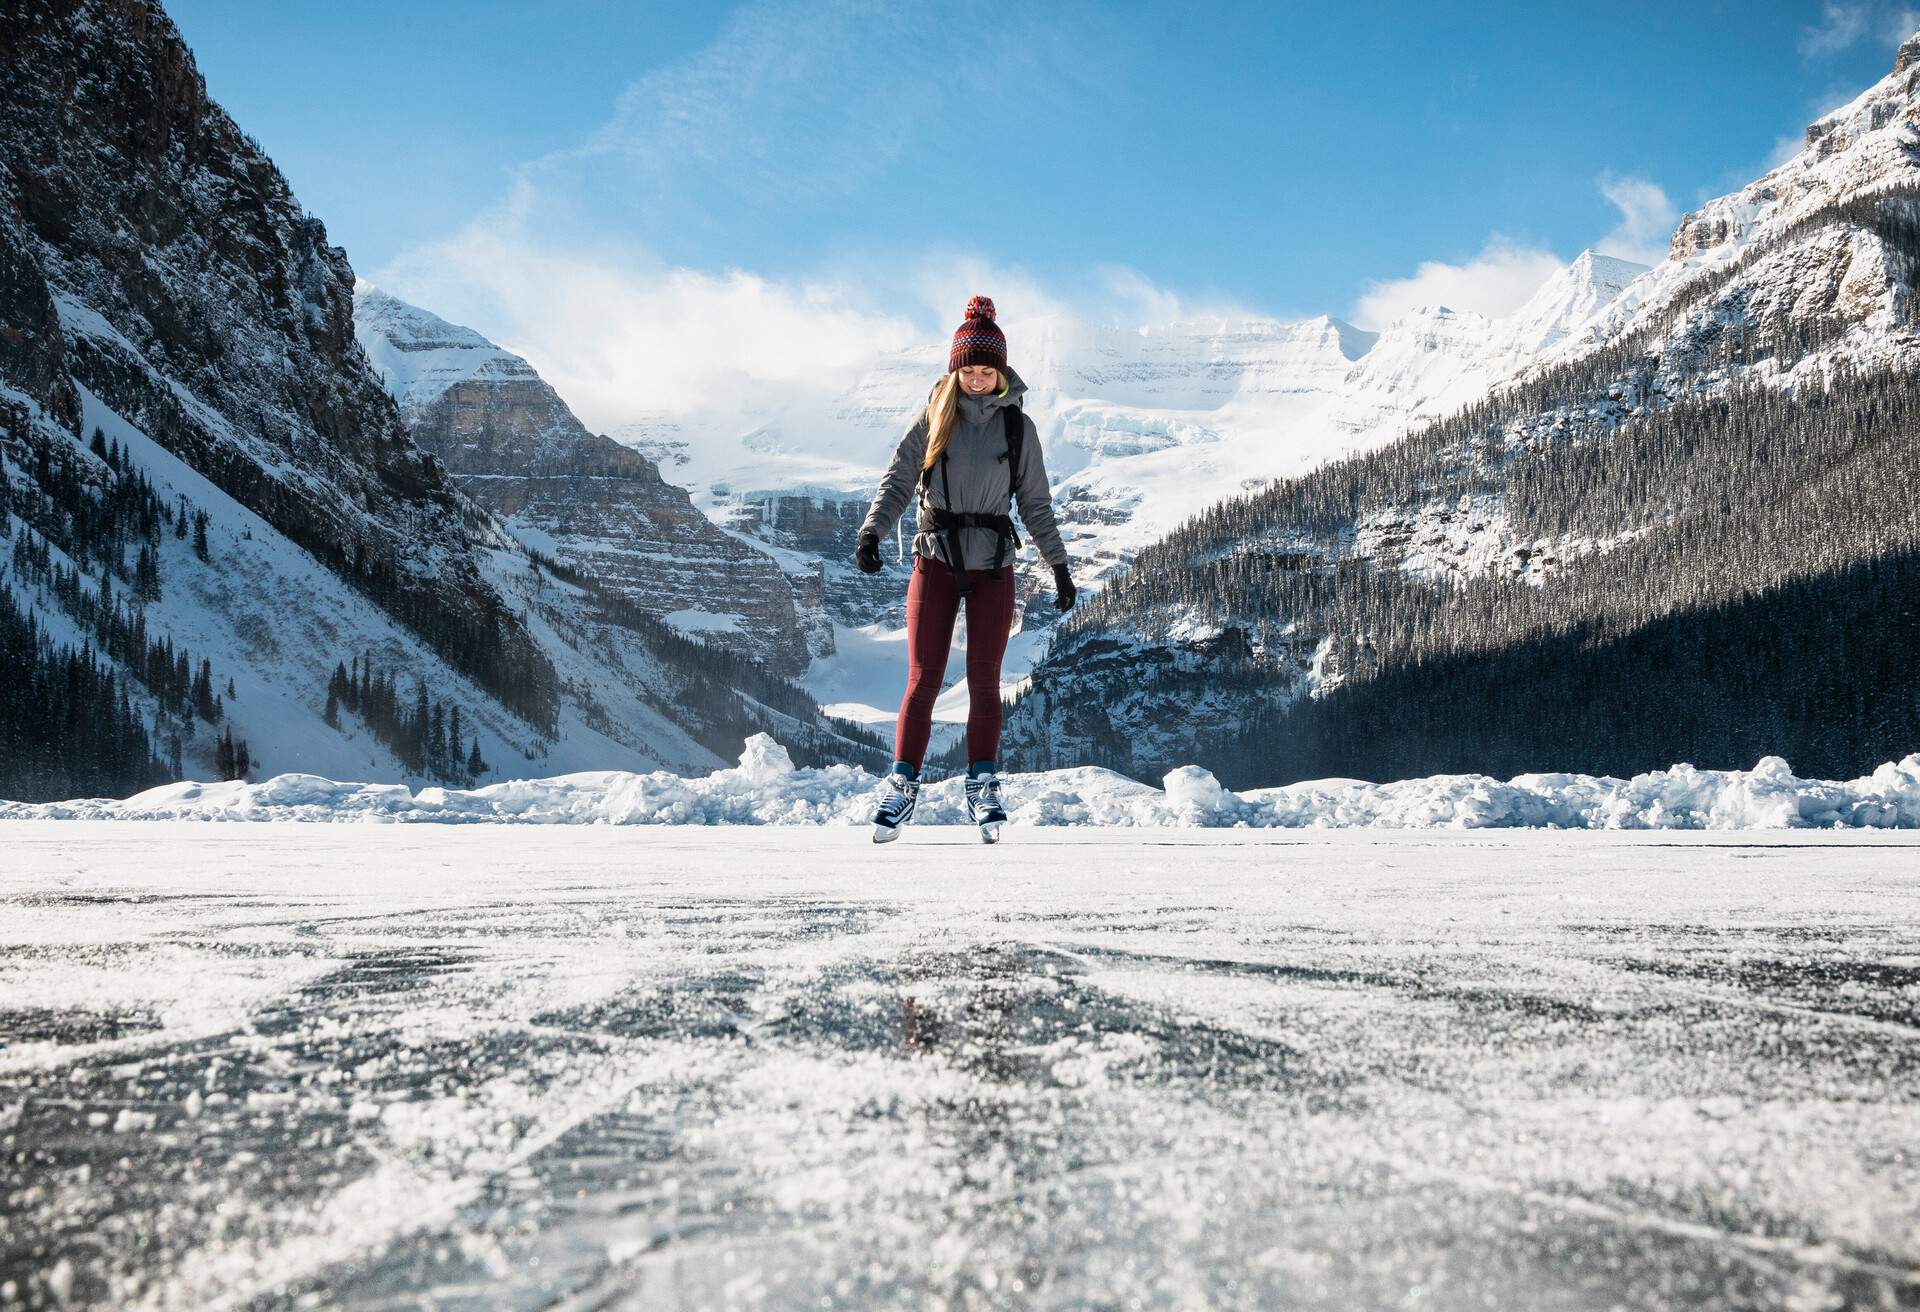 DEST_CANADA_FROZEN_LAKE_LOUISE_WOMAN_SKATING_GettyImages-1217400288